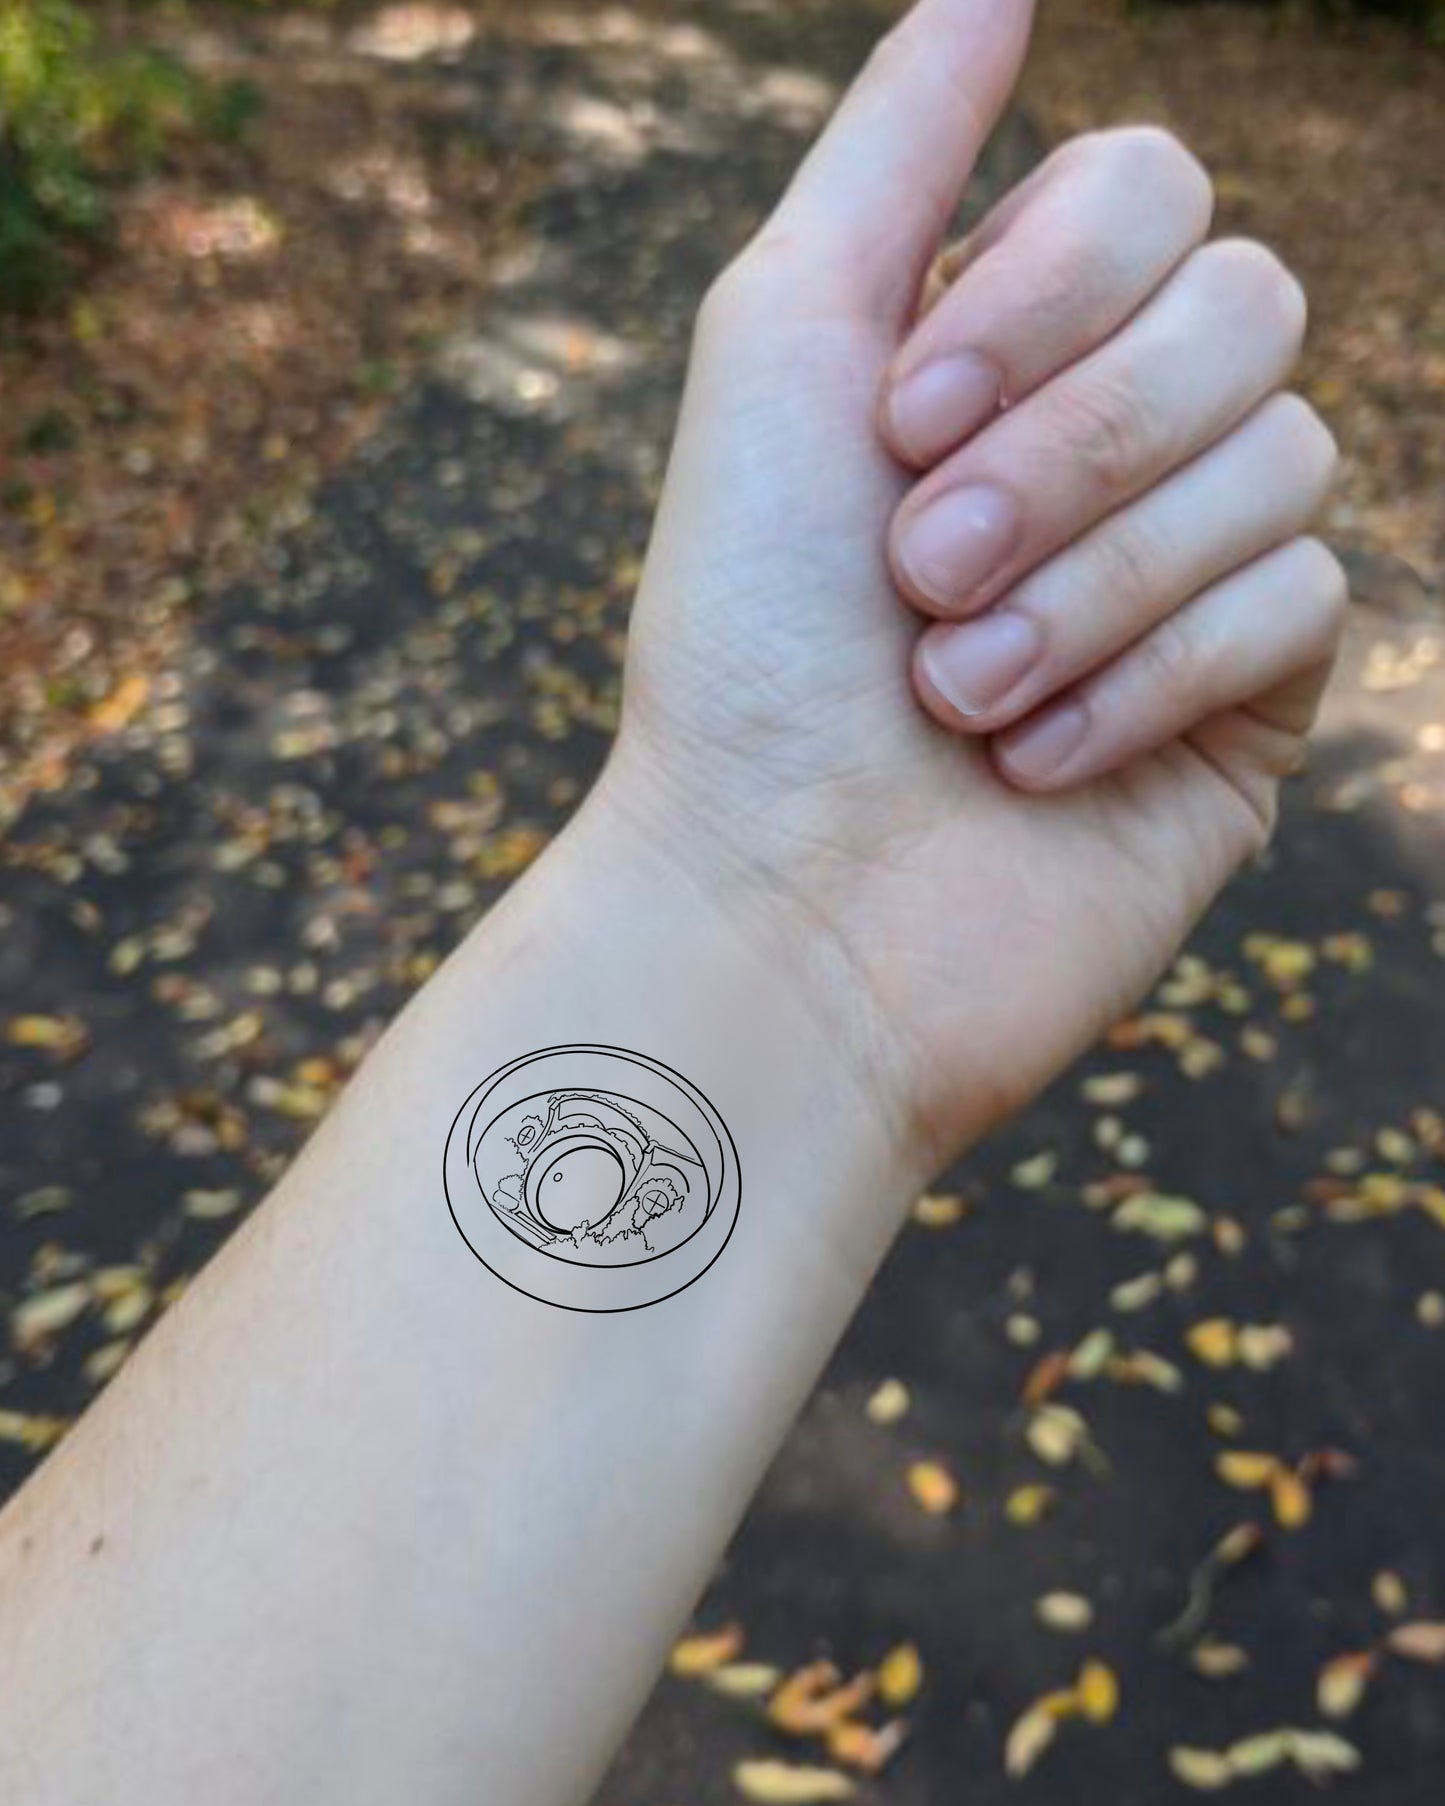 Hobbit Hole in a Ring - Temporary Tattoo/Skin Safe Sticker